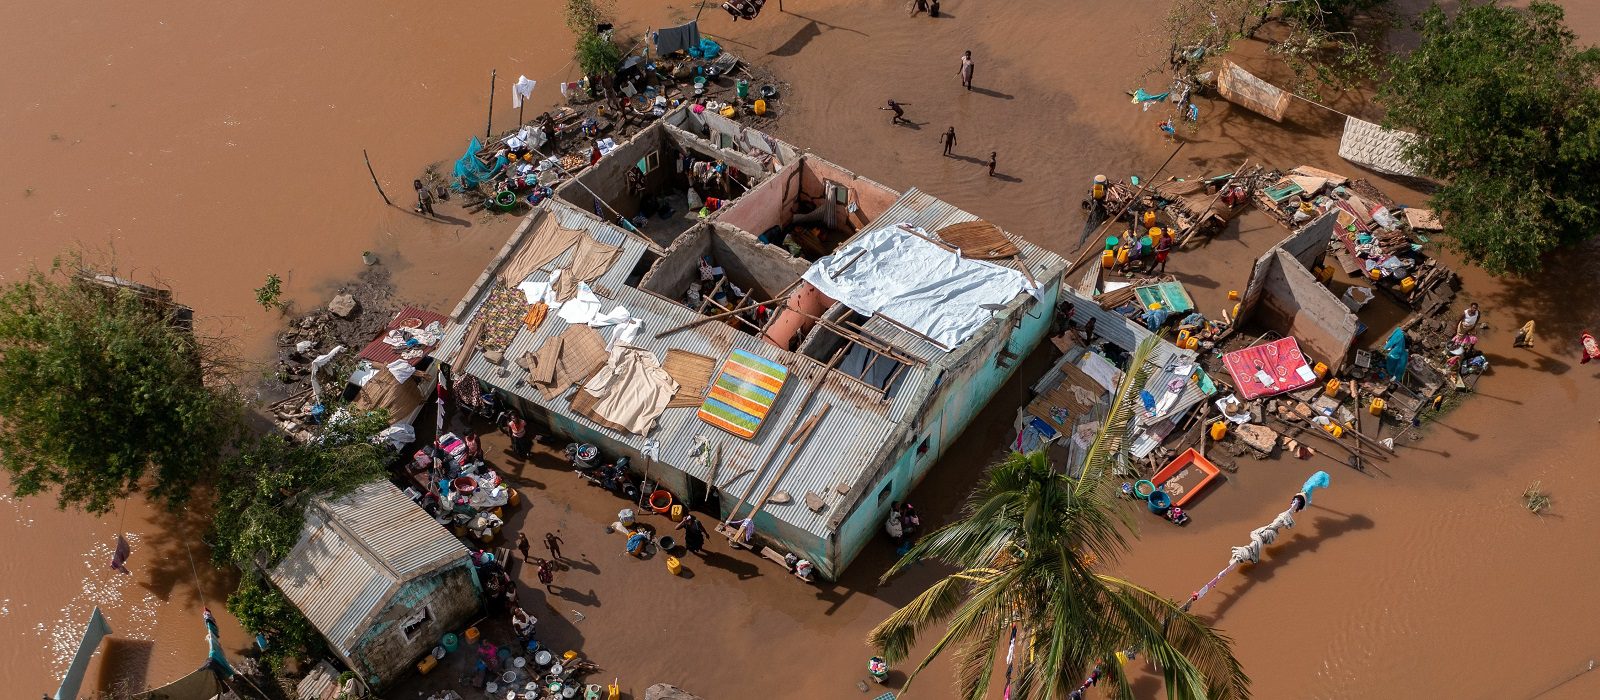 Aerial of the poor population of Africa living in old buildings during the flood